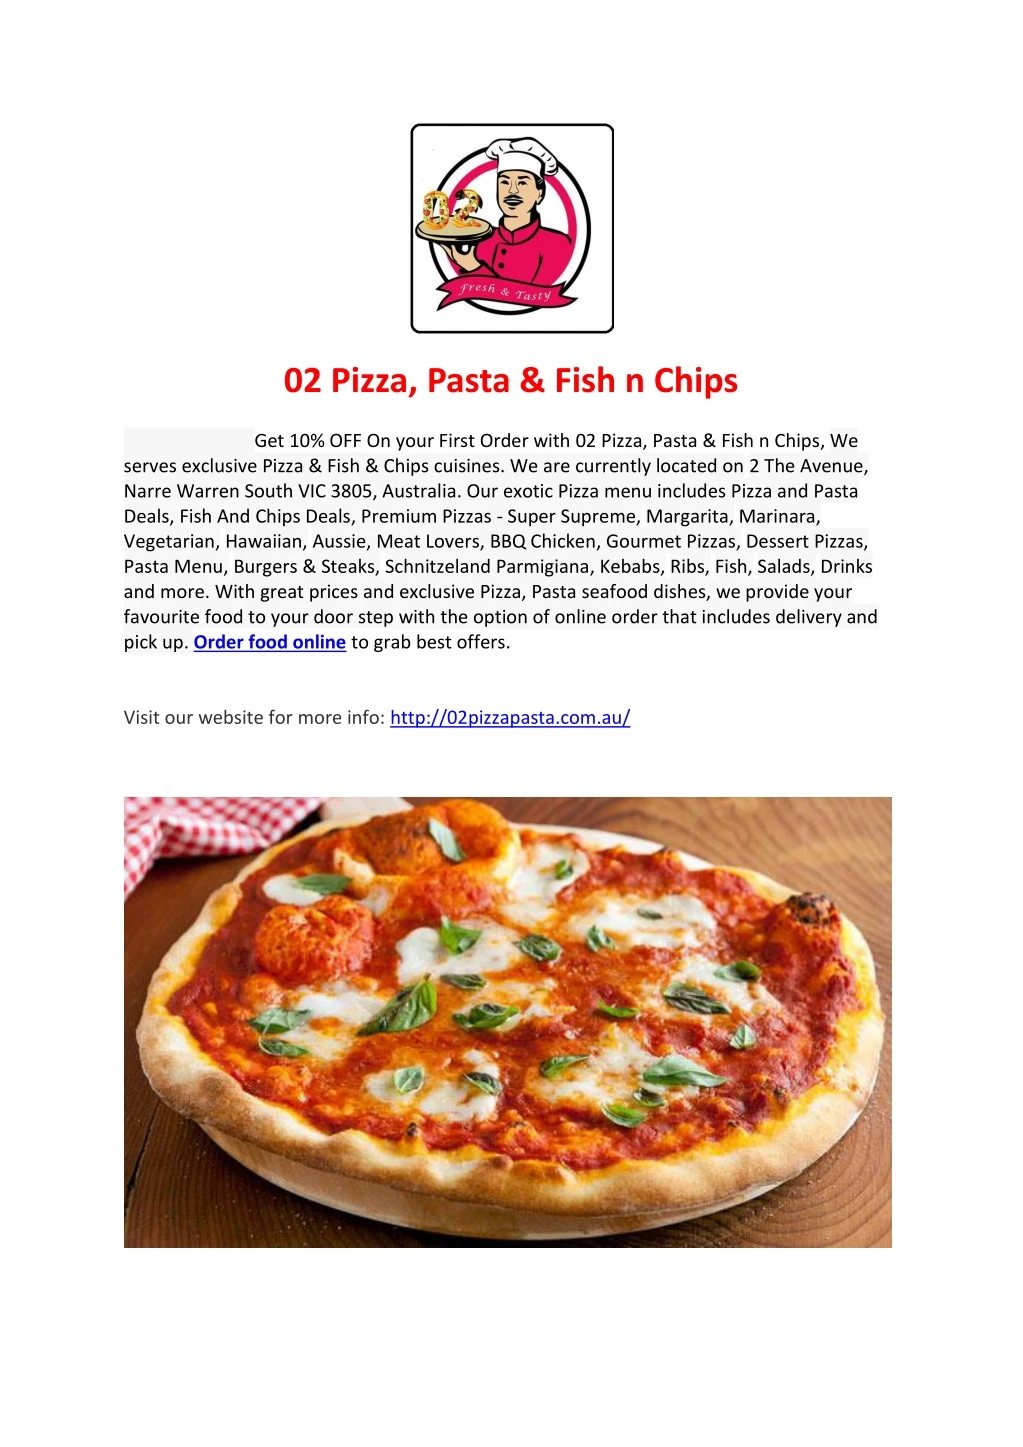 02 pizza pasta fish n chips get 10 off on your